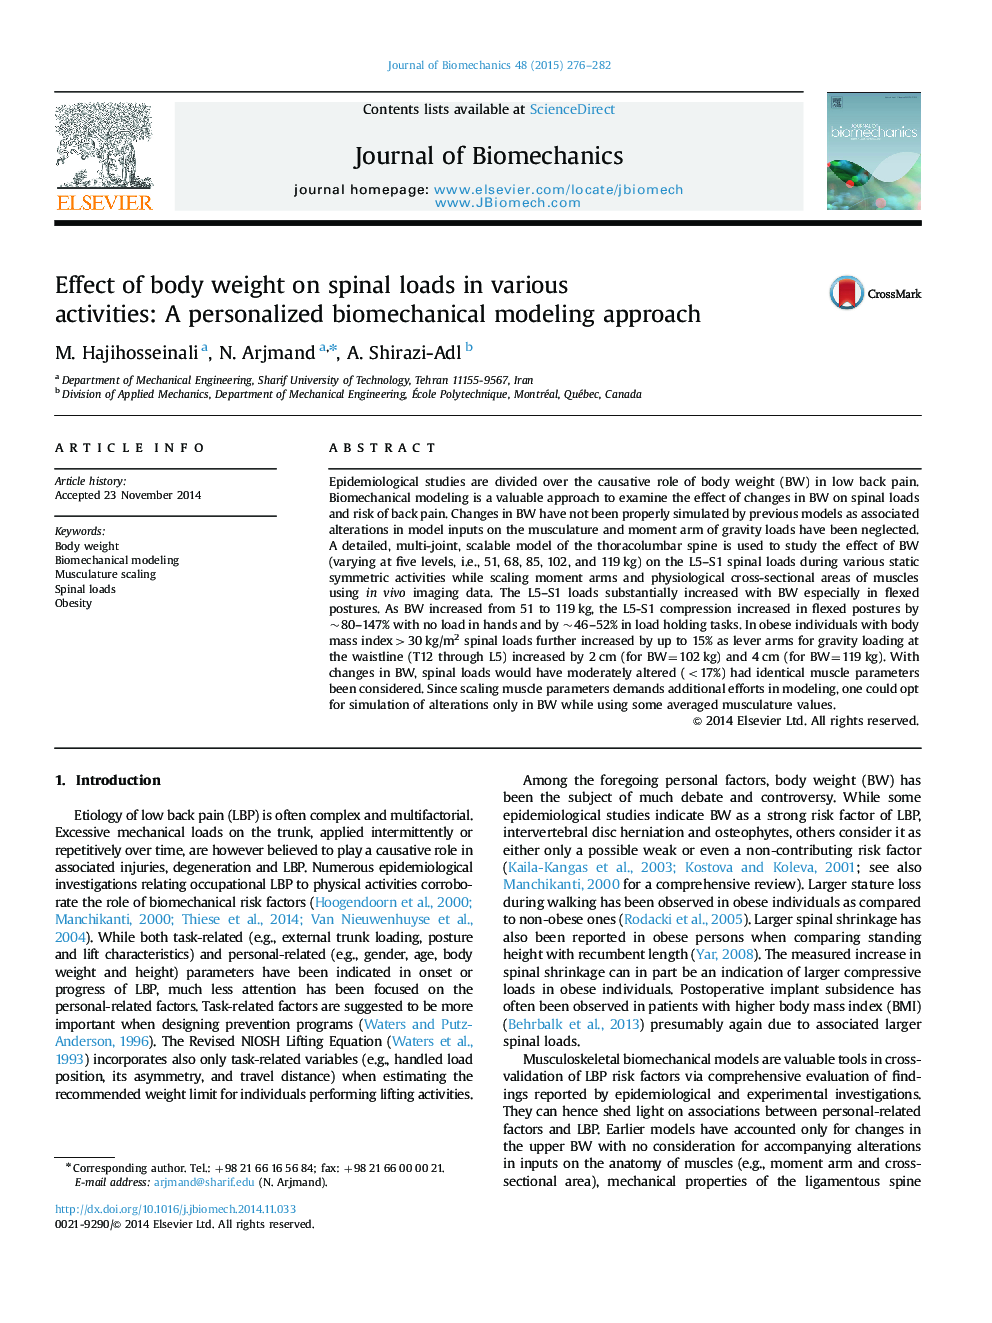 Effect of body weight on spinal loads in various activities: A personalized biomechanical modeling approach